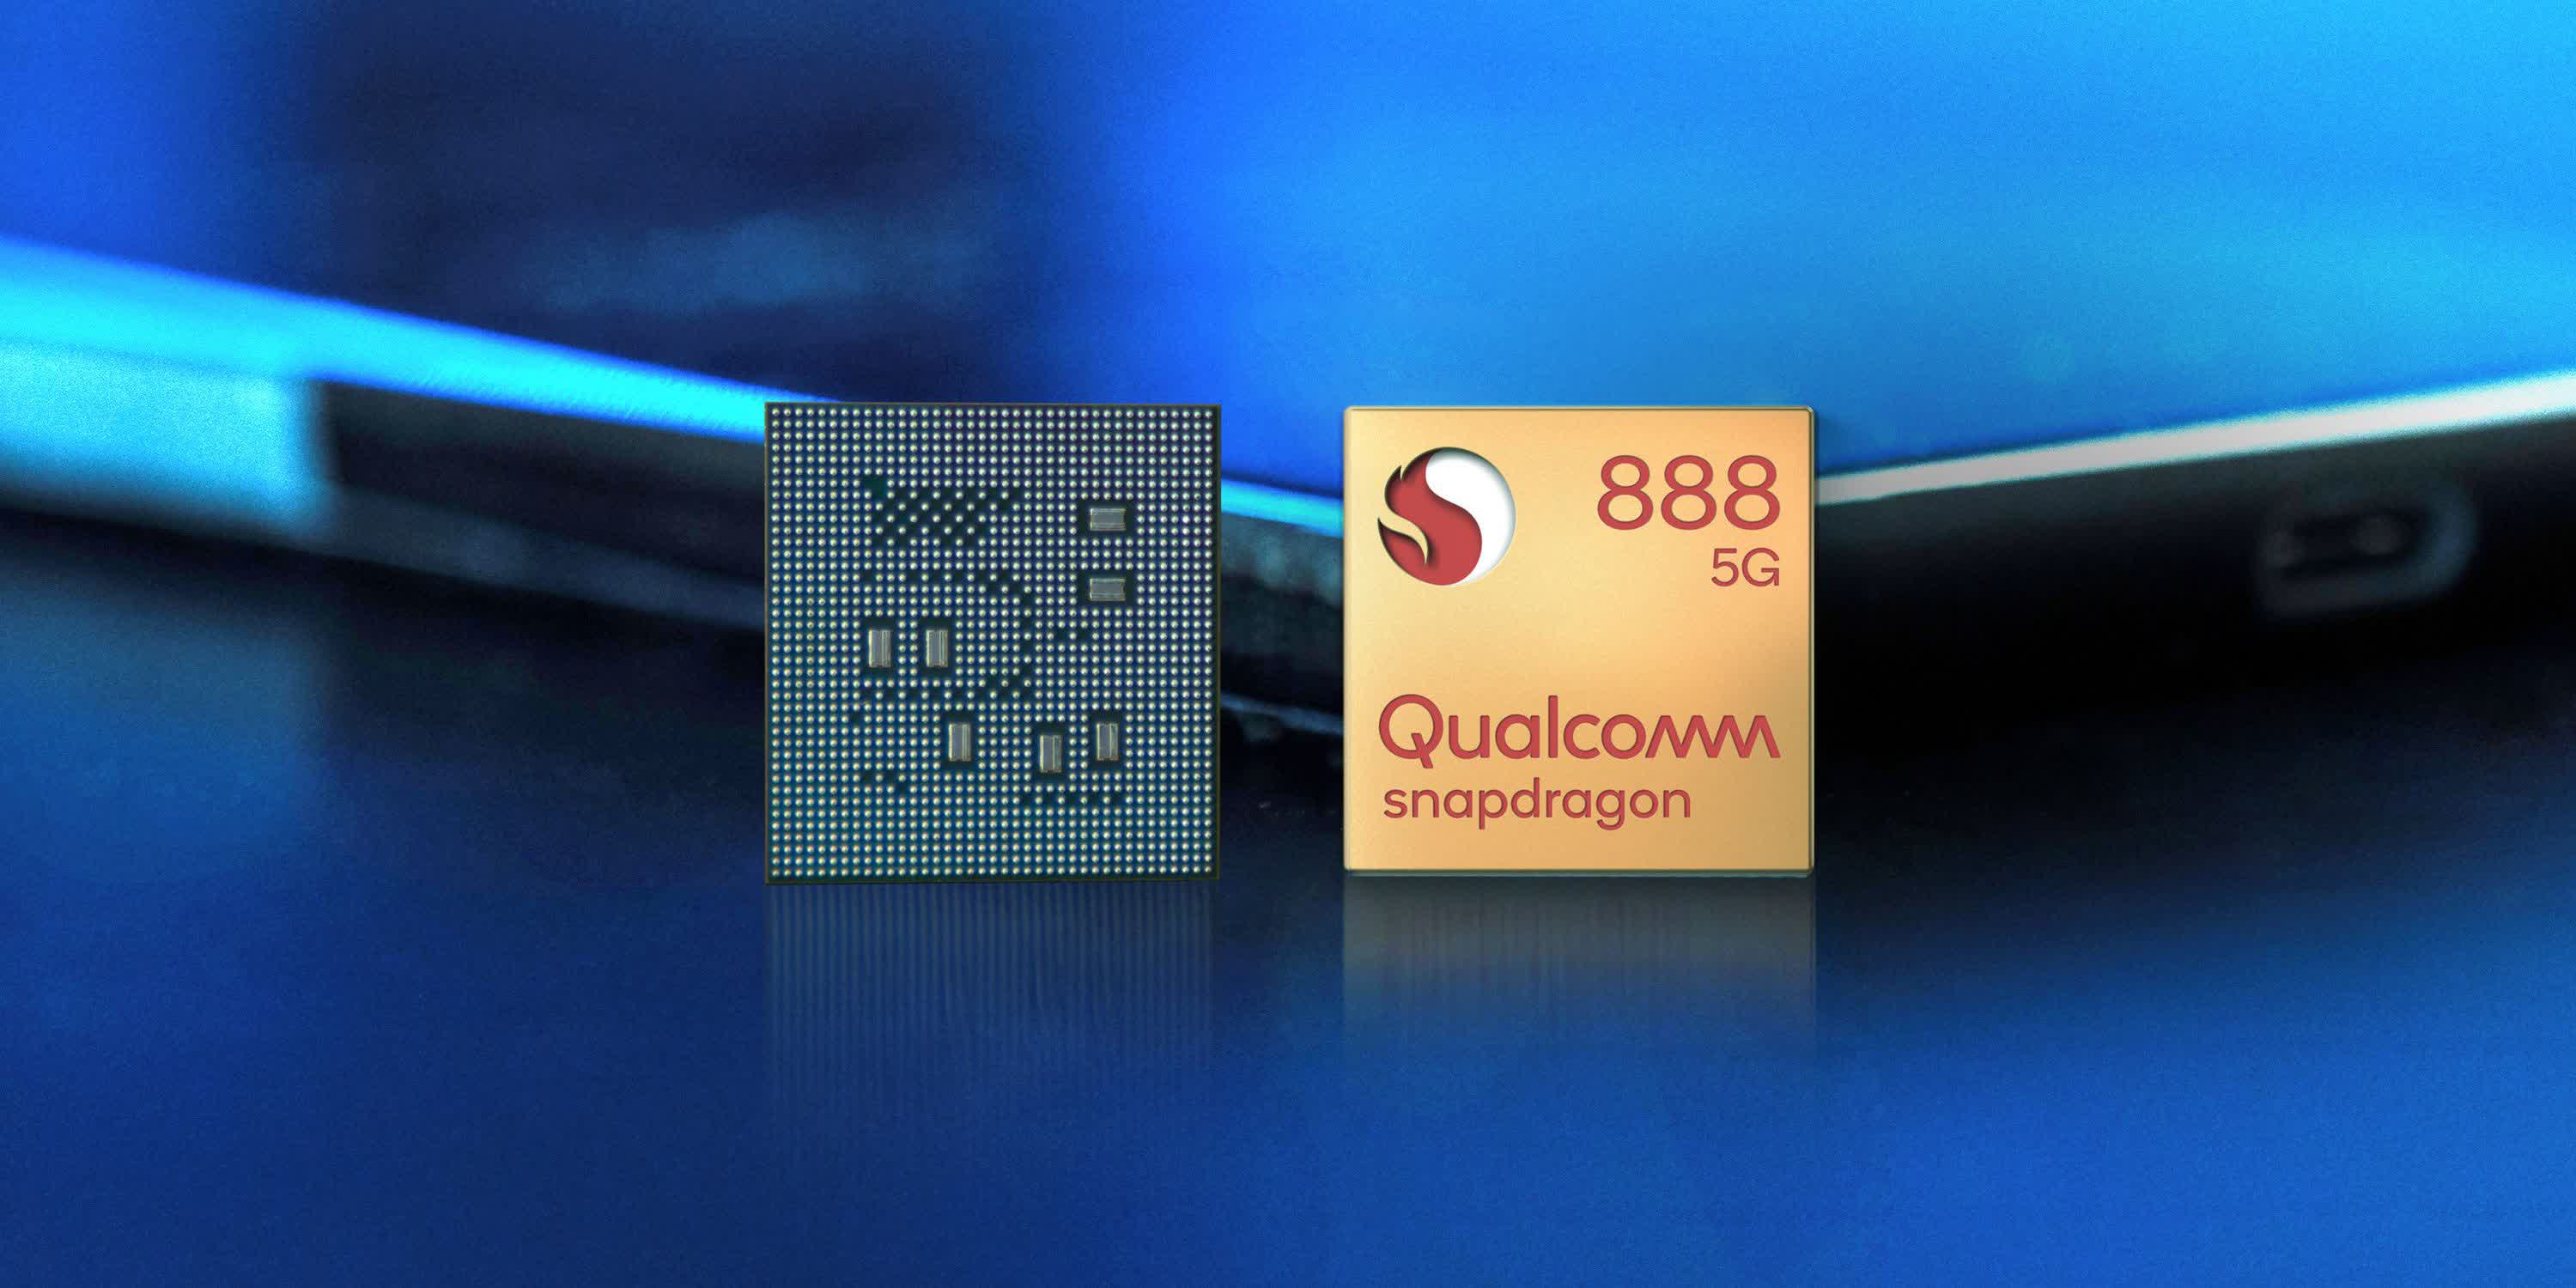 Global chip shortage is reportedly affecting phones as Qualcomm struggles to meet demand